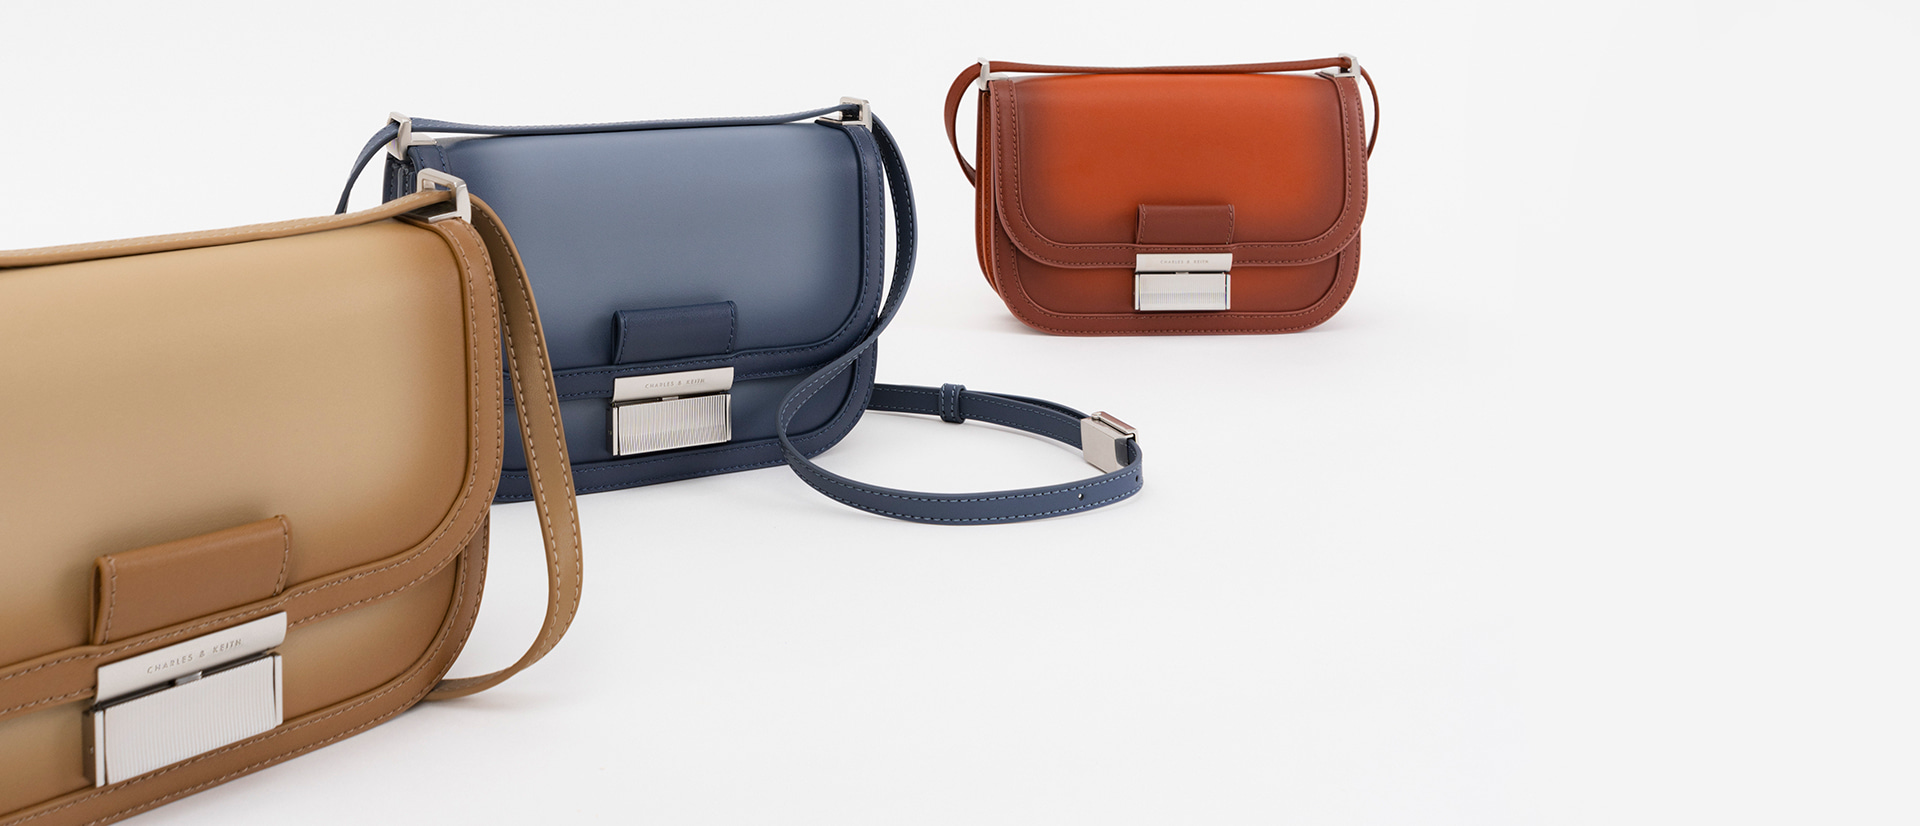 Women’s Charlot bag in sand and navy - CHARLES & KEITH